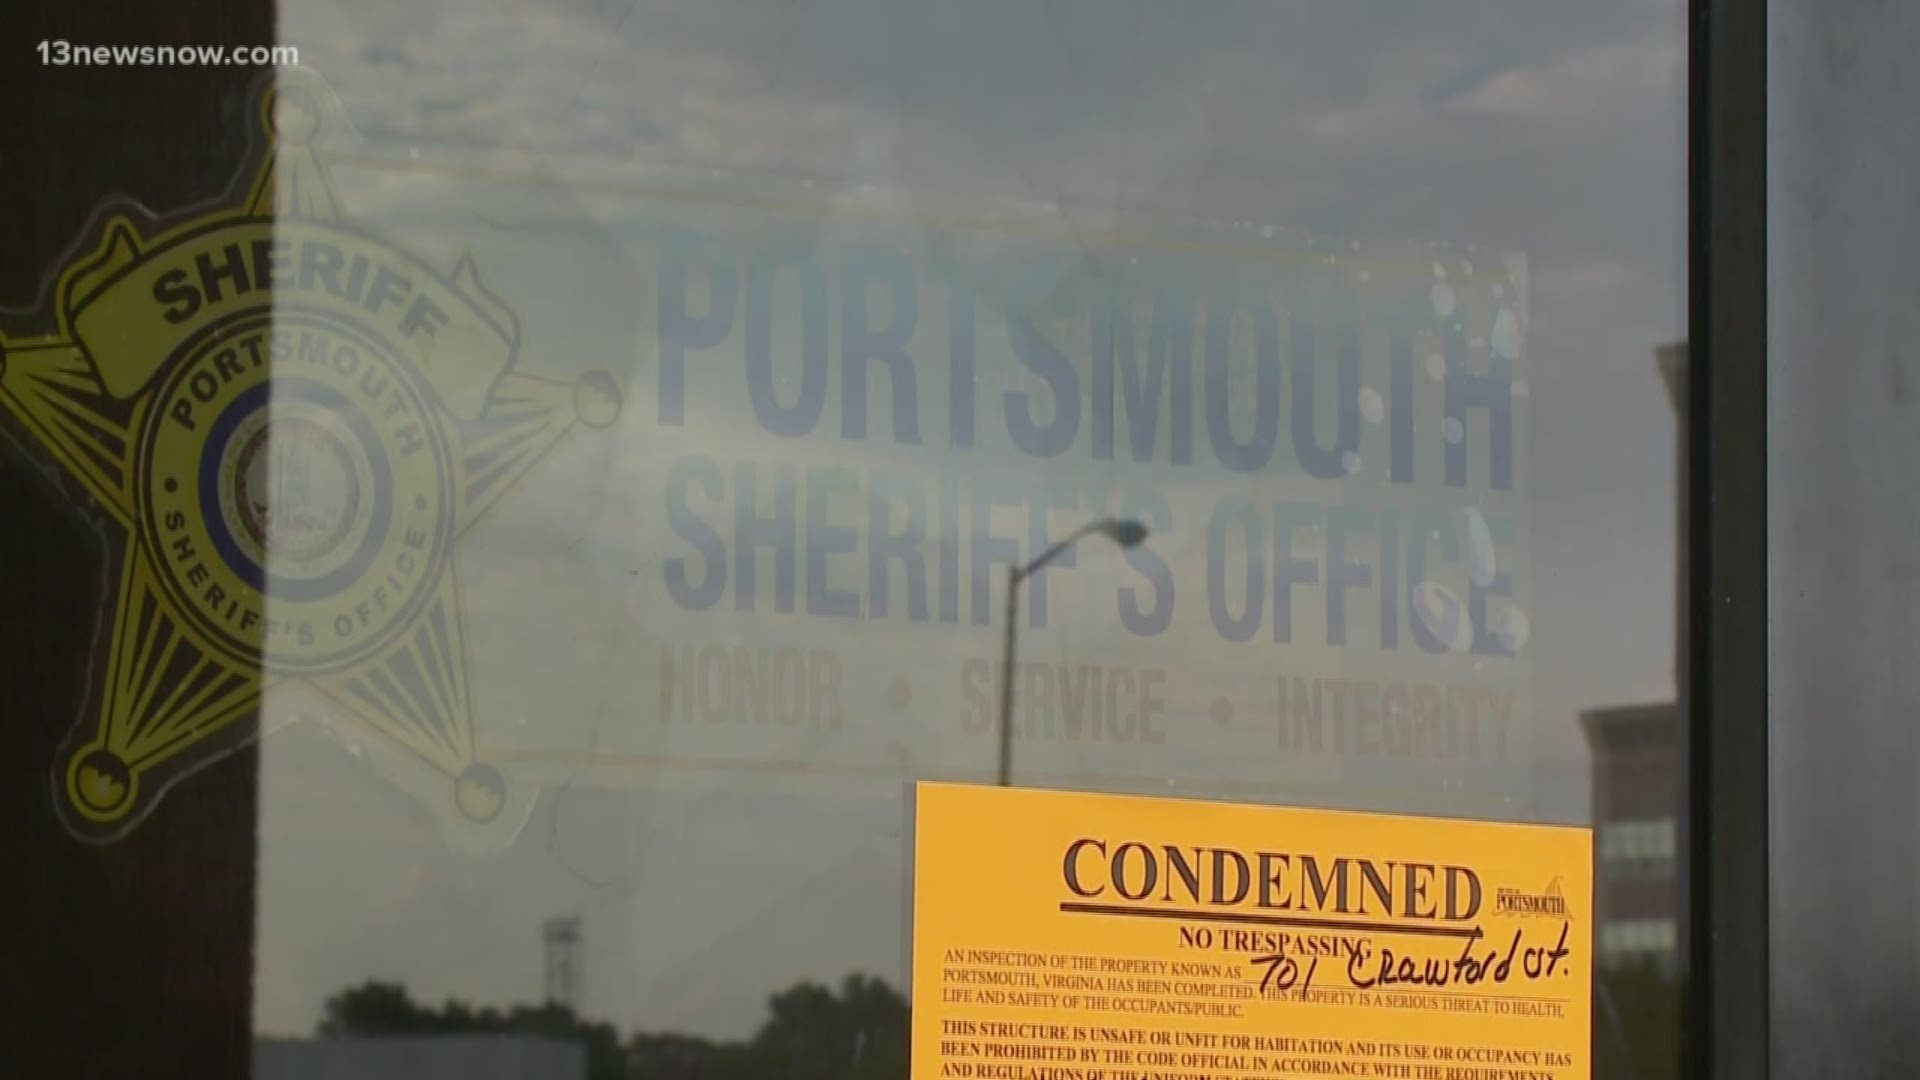 Portsmouth's Sheriff said this decision is politics and tomorrow will be business as usual. The Vice Mayor was caught off guard by the decision.